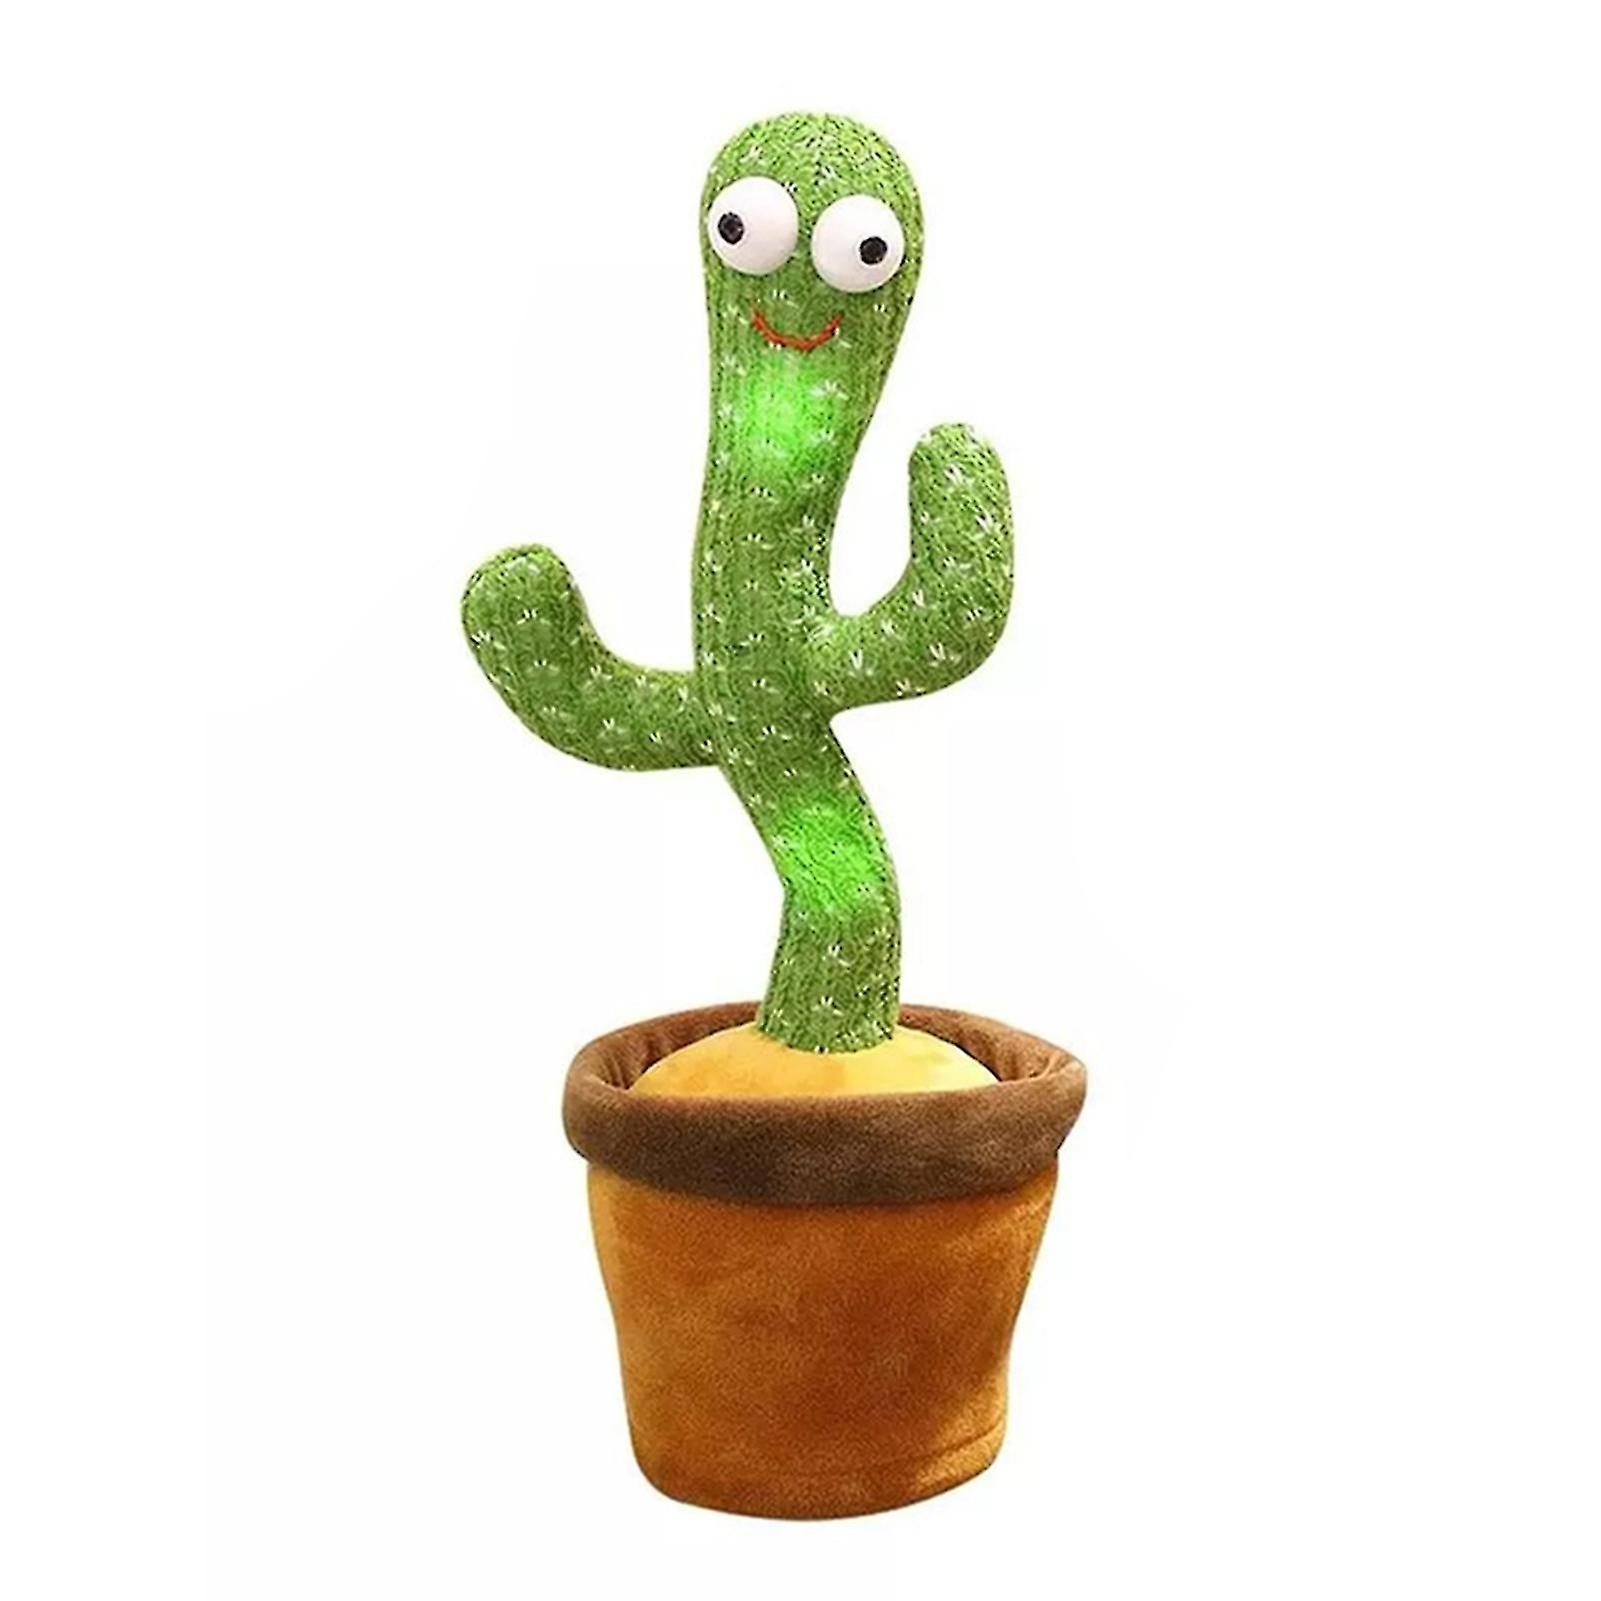 Dancing Playing Talking Cactus Toy with Music zaappy.com